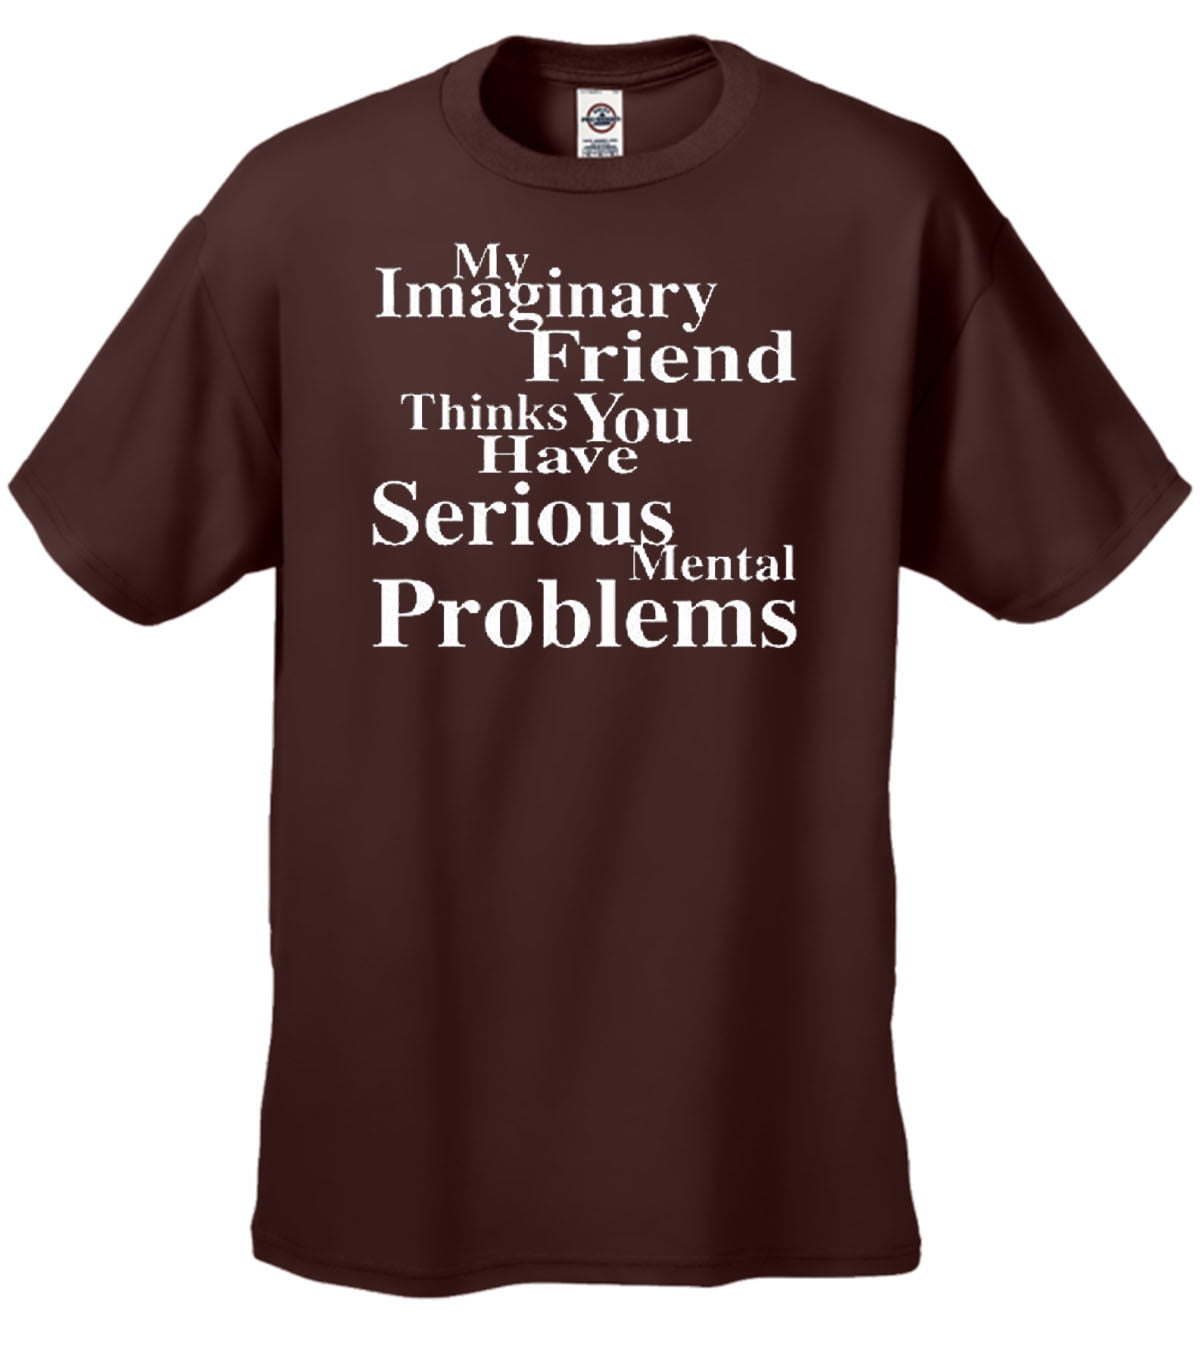 Funny friends футболка. Funny t-Shirt. Burn your problems футболка. Квизлет think seriously. My friend thinks that